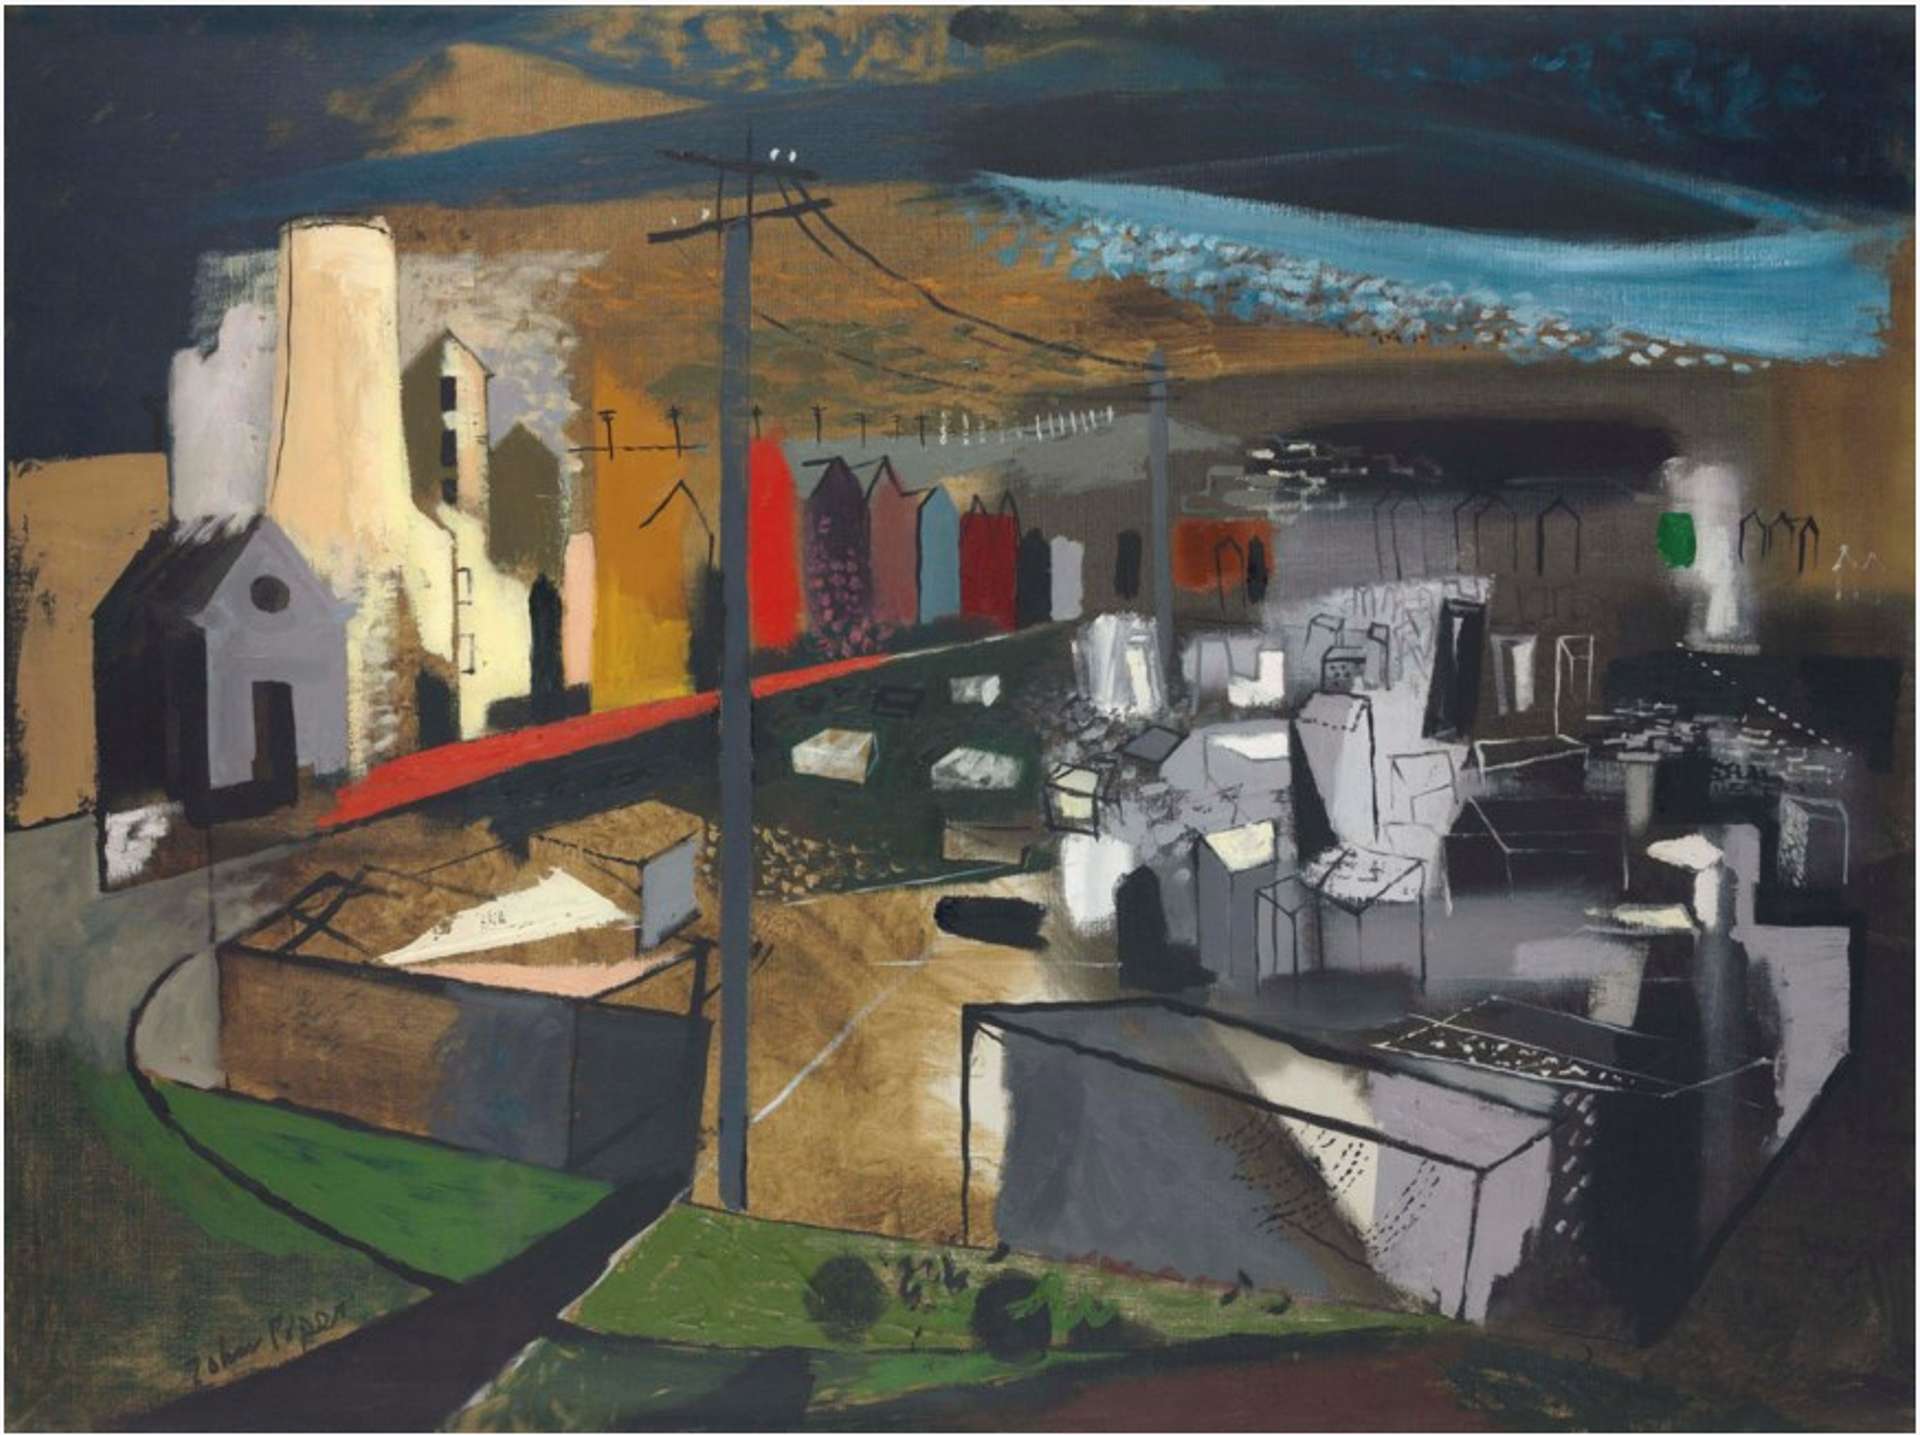 A semi-abstract, semi-figurative artwork in various hues depicting architectural buildings in varying shades, delineated by thin black lines. The scene portrays a seaside town with a curving road in the centre leading to the sea in the distance.